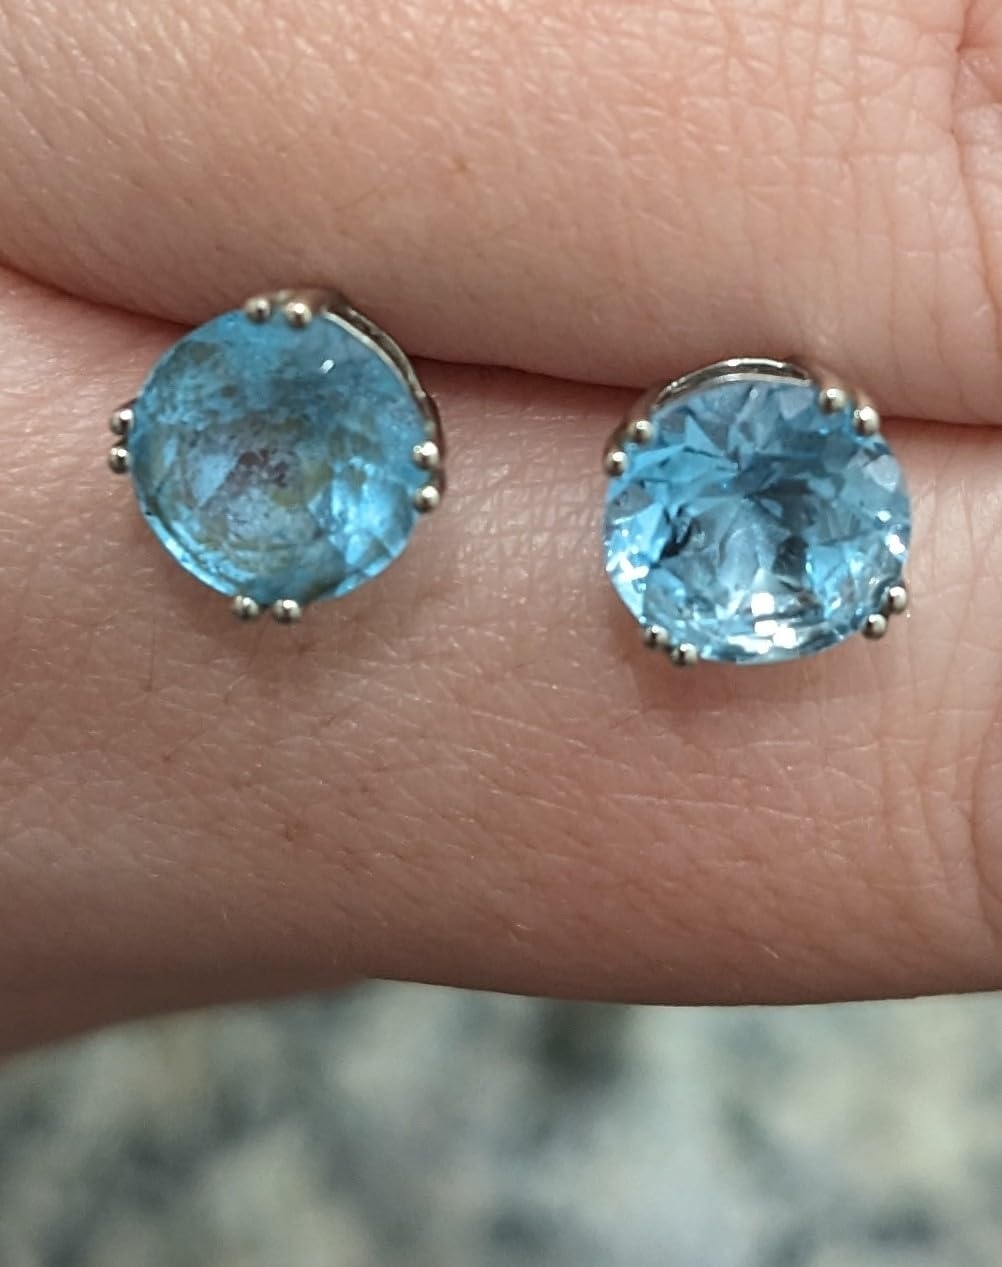 Reviewer holding two blue stone earrings with the right one cleaned with the solution